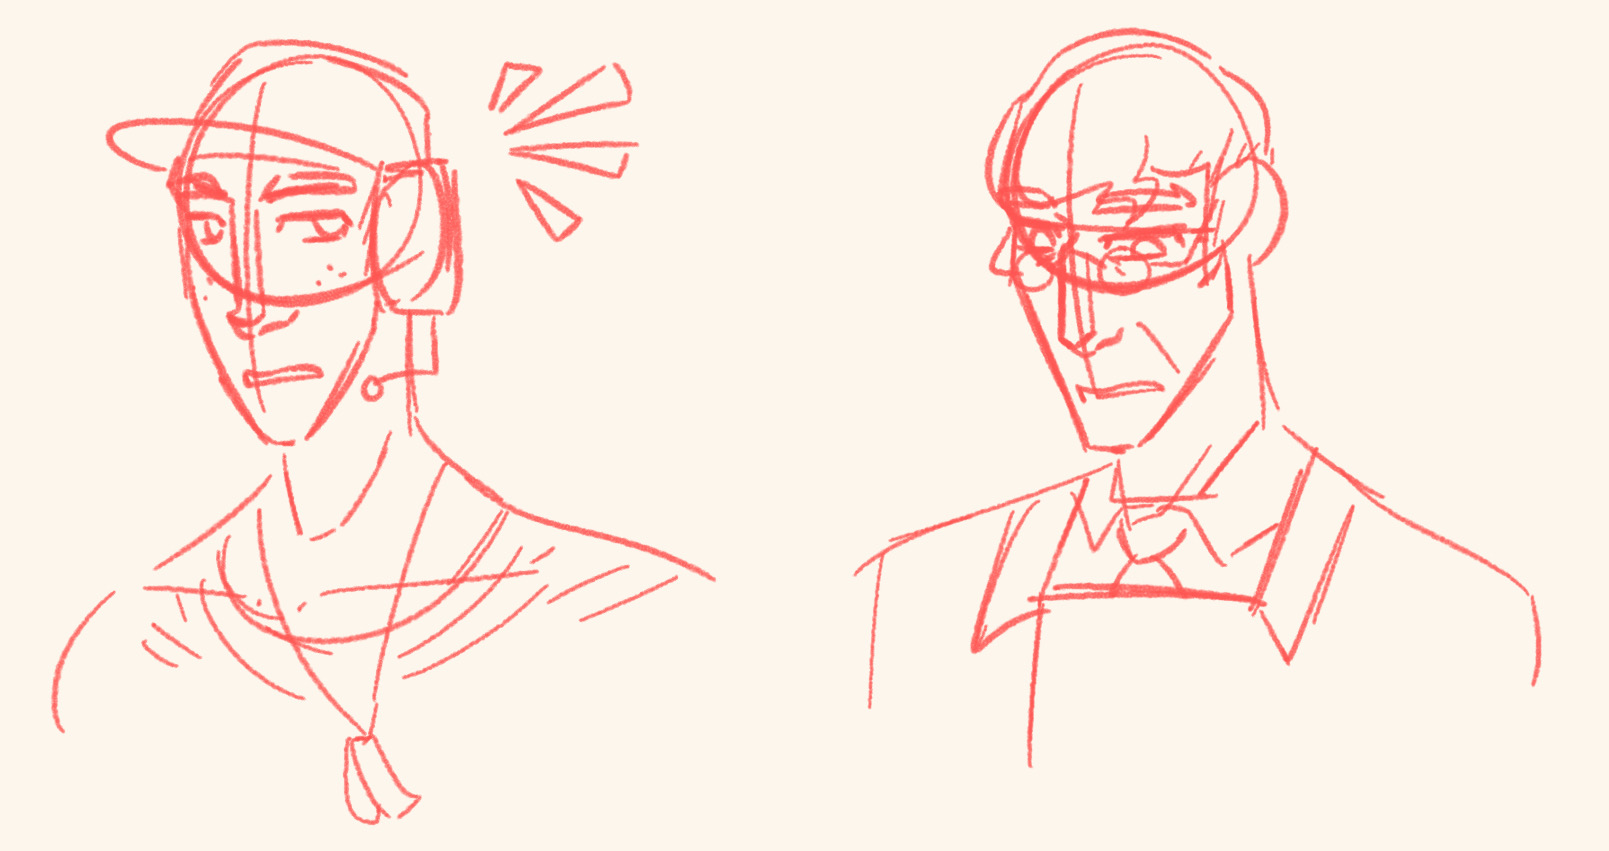 Two sketches in red, pencil-like digital pen. Both are busts at three quarter angles, facing left. Scout is looking to the right, with a little marker near his head indicating he is alert. Medic is looking downwards, and also looking vaguely concerned.